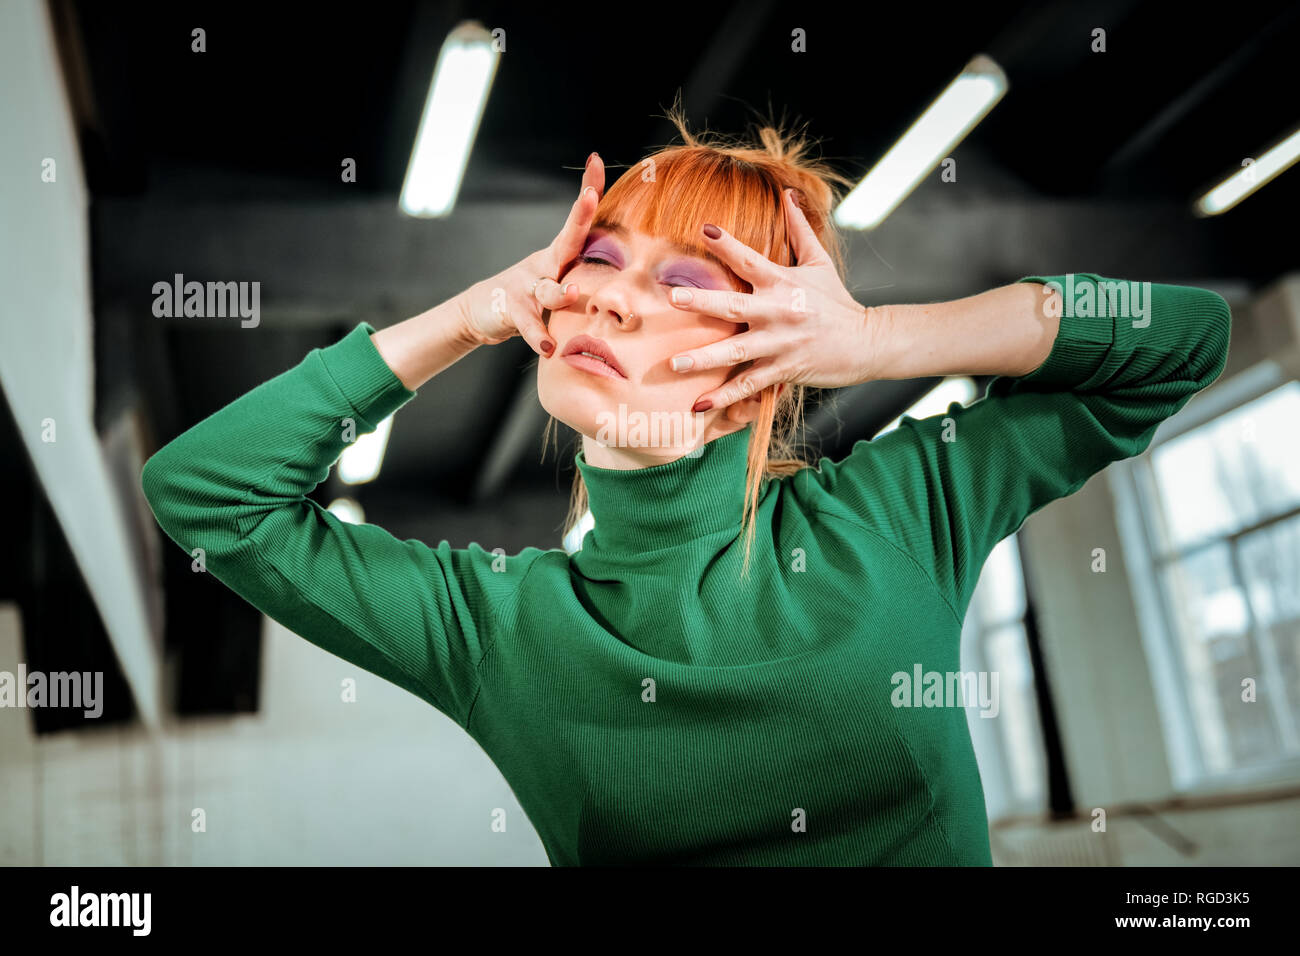 Red-haired professional choreographer with hair bun looking artistic Stock Photo